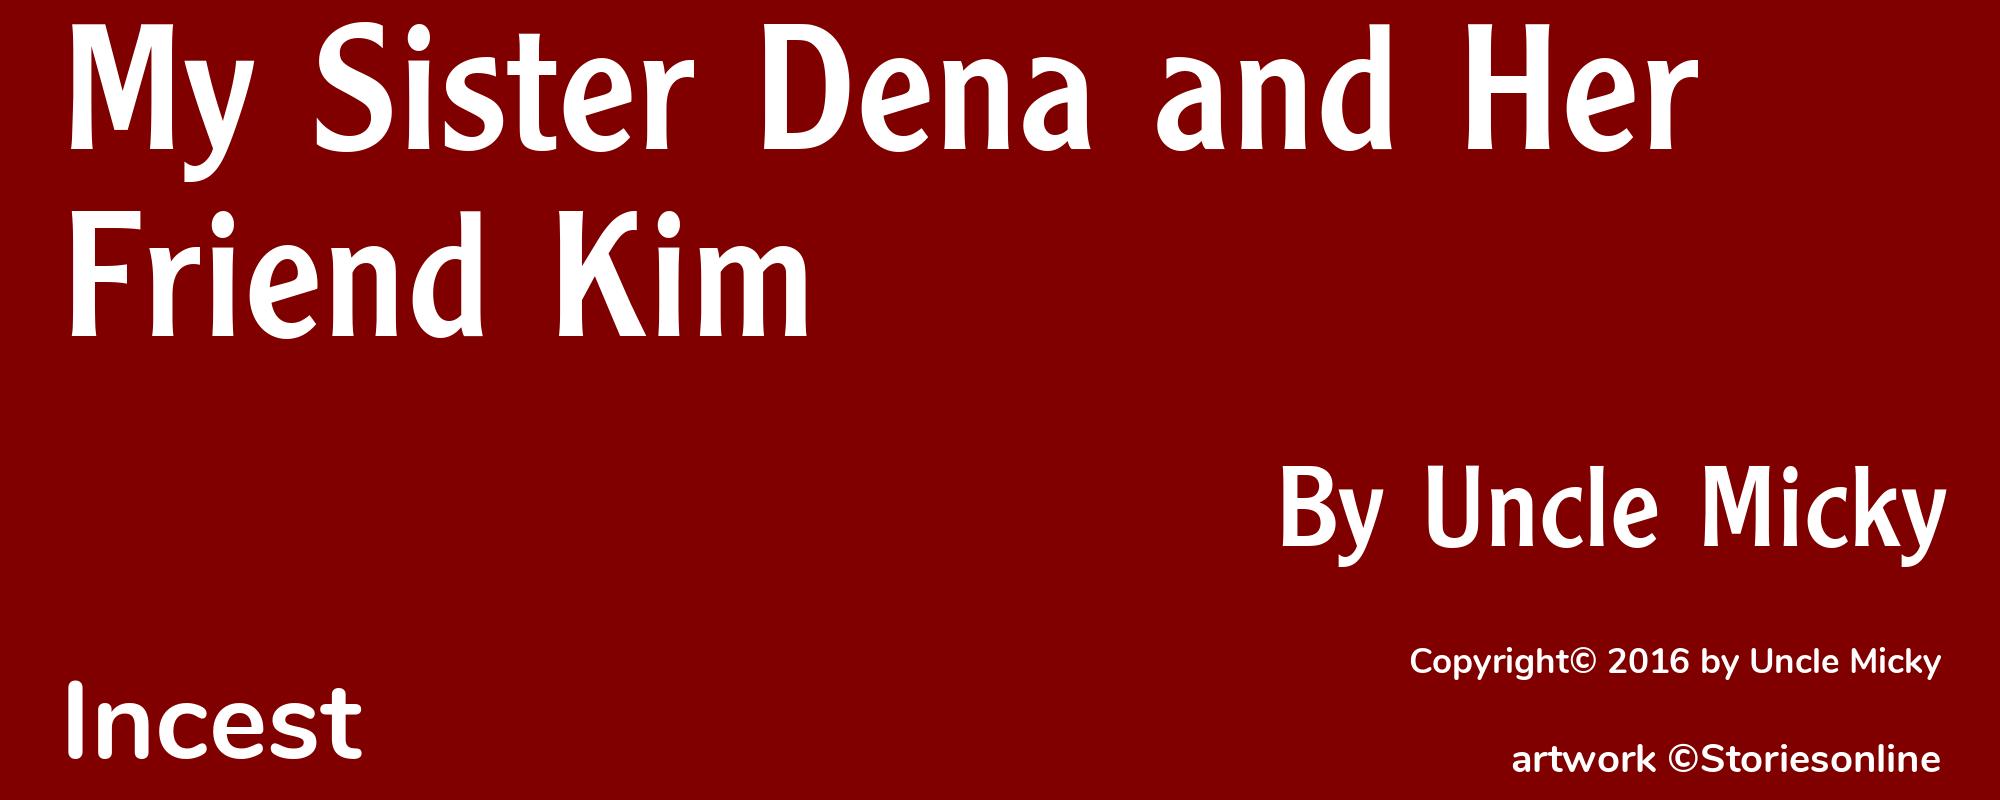 My Sister Dena and Her Friend Kim - Cover